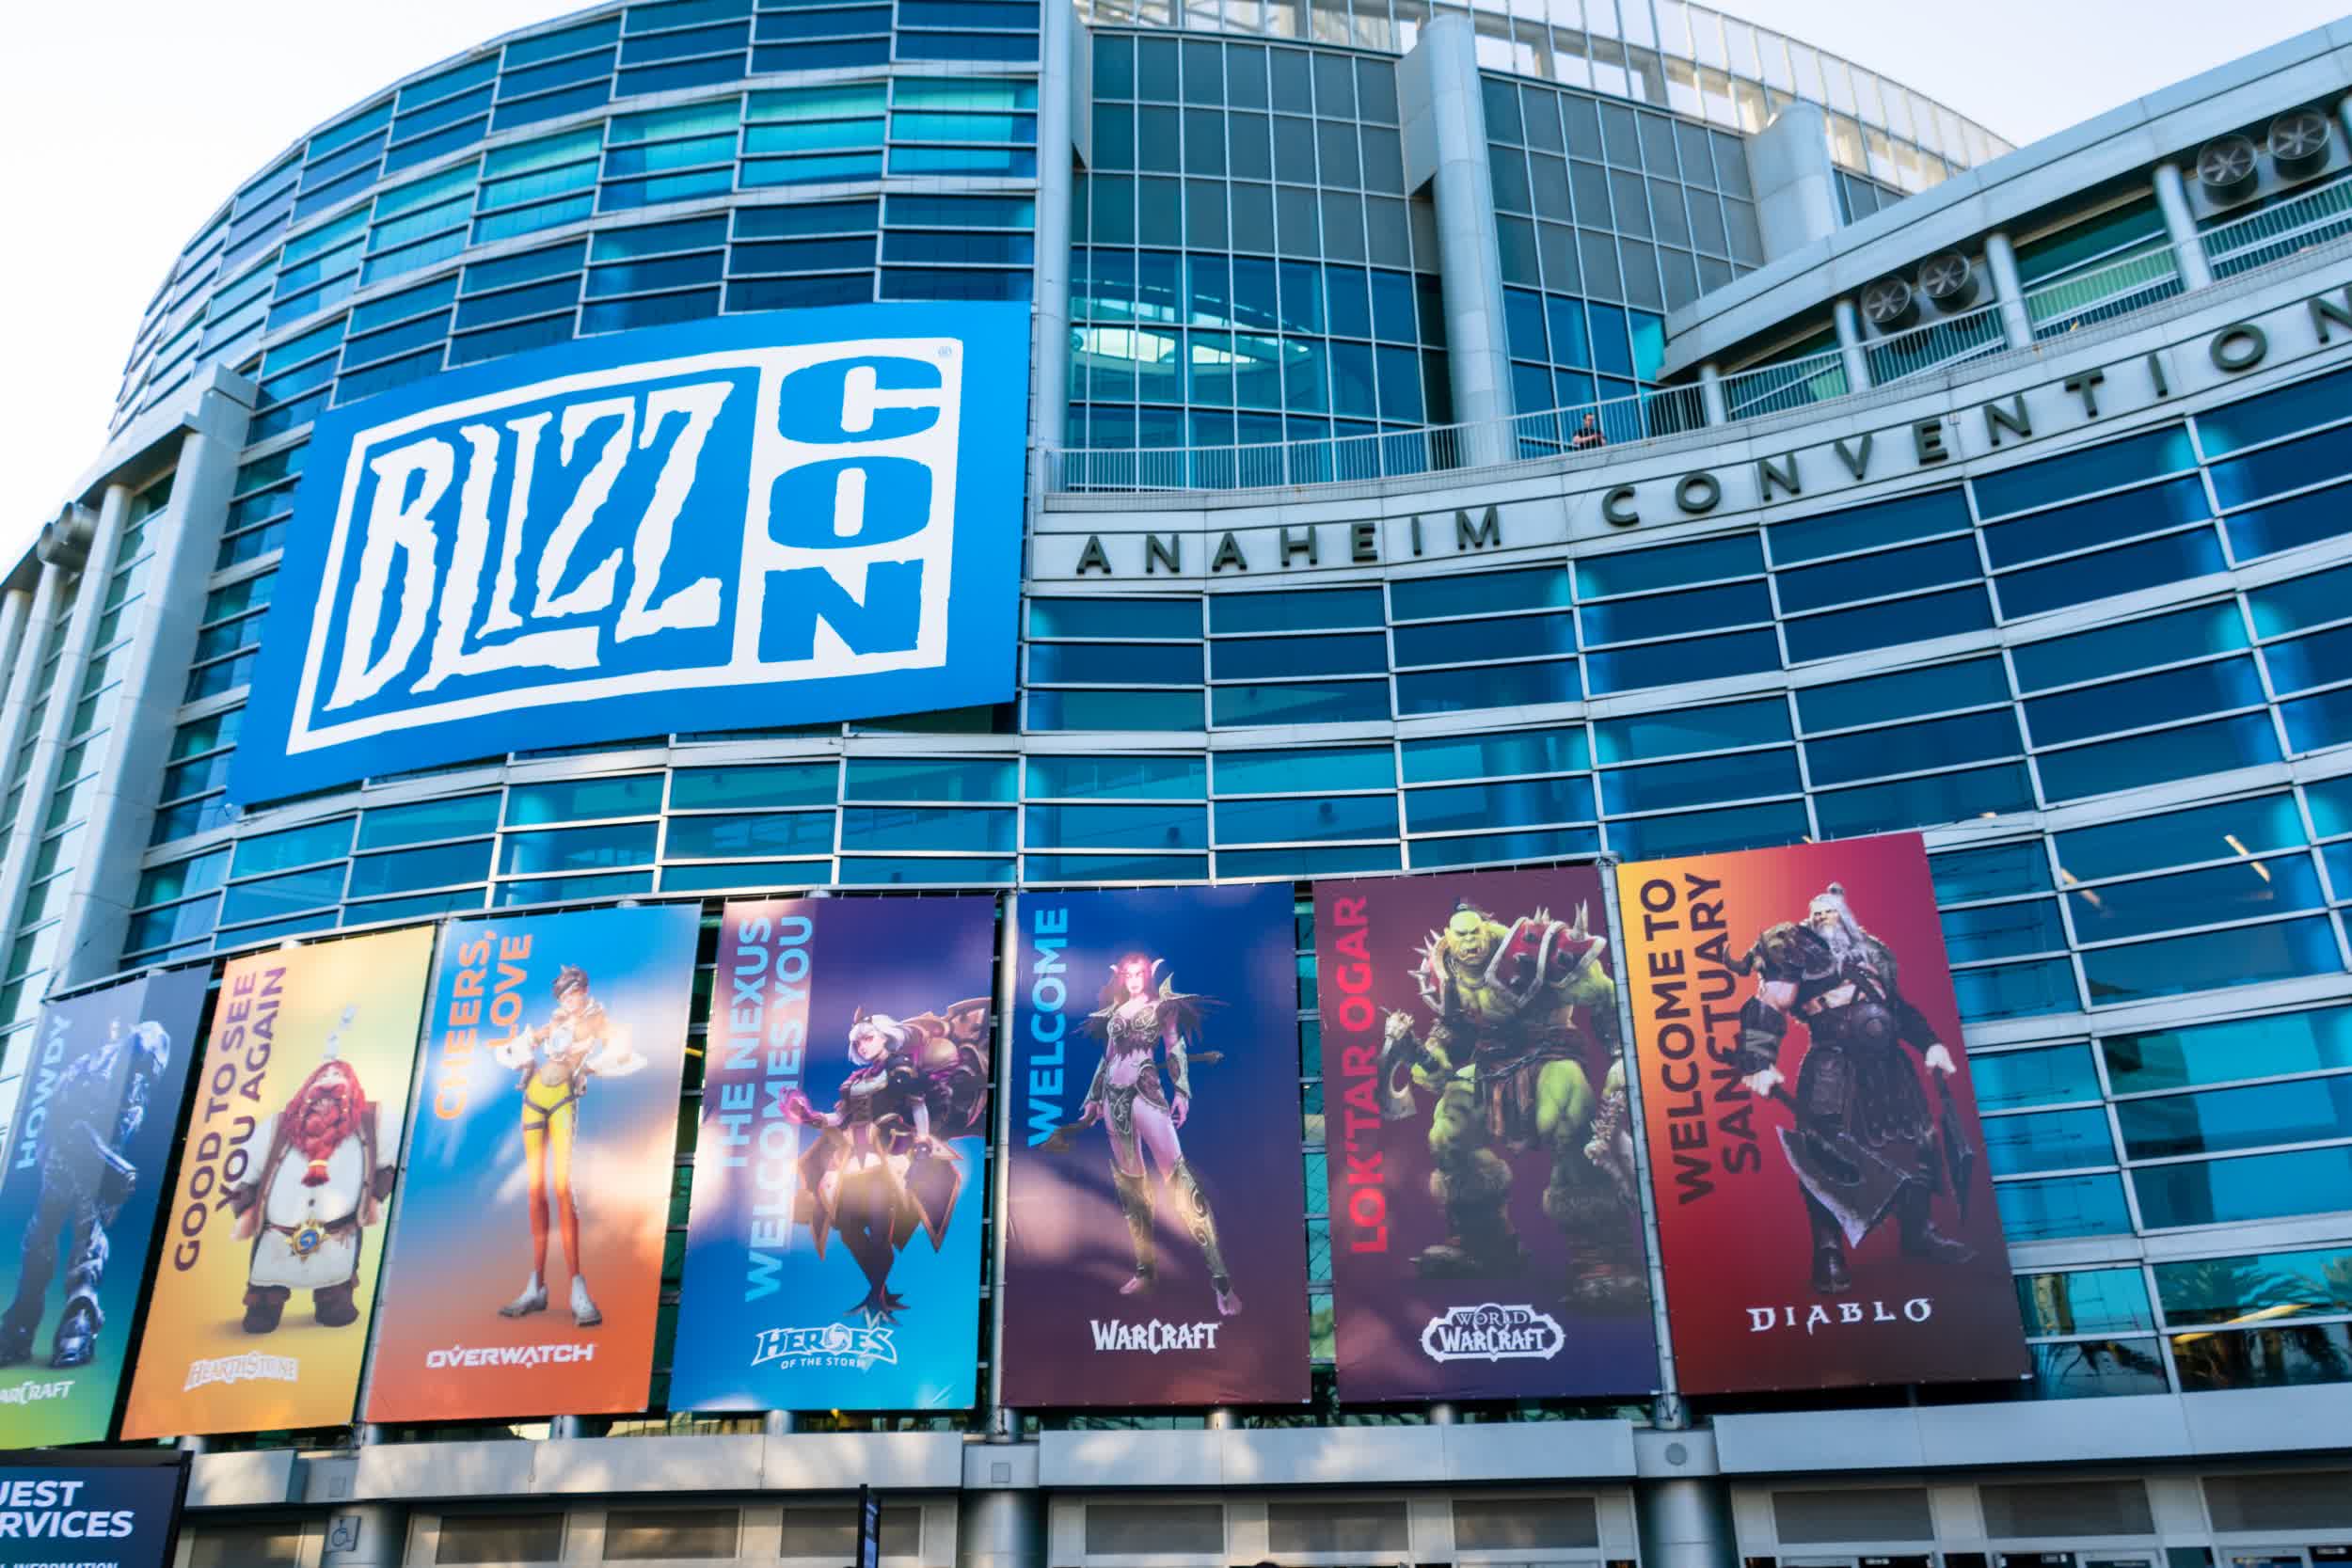 BlizzCon gets rescheduled as online-only event in February 2021